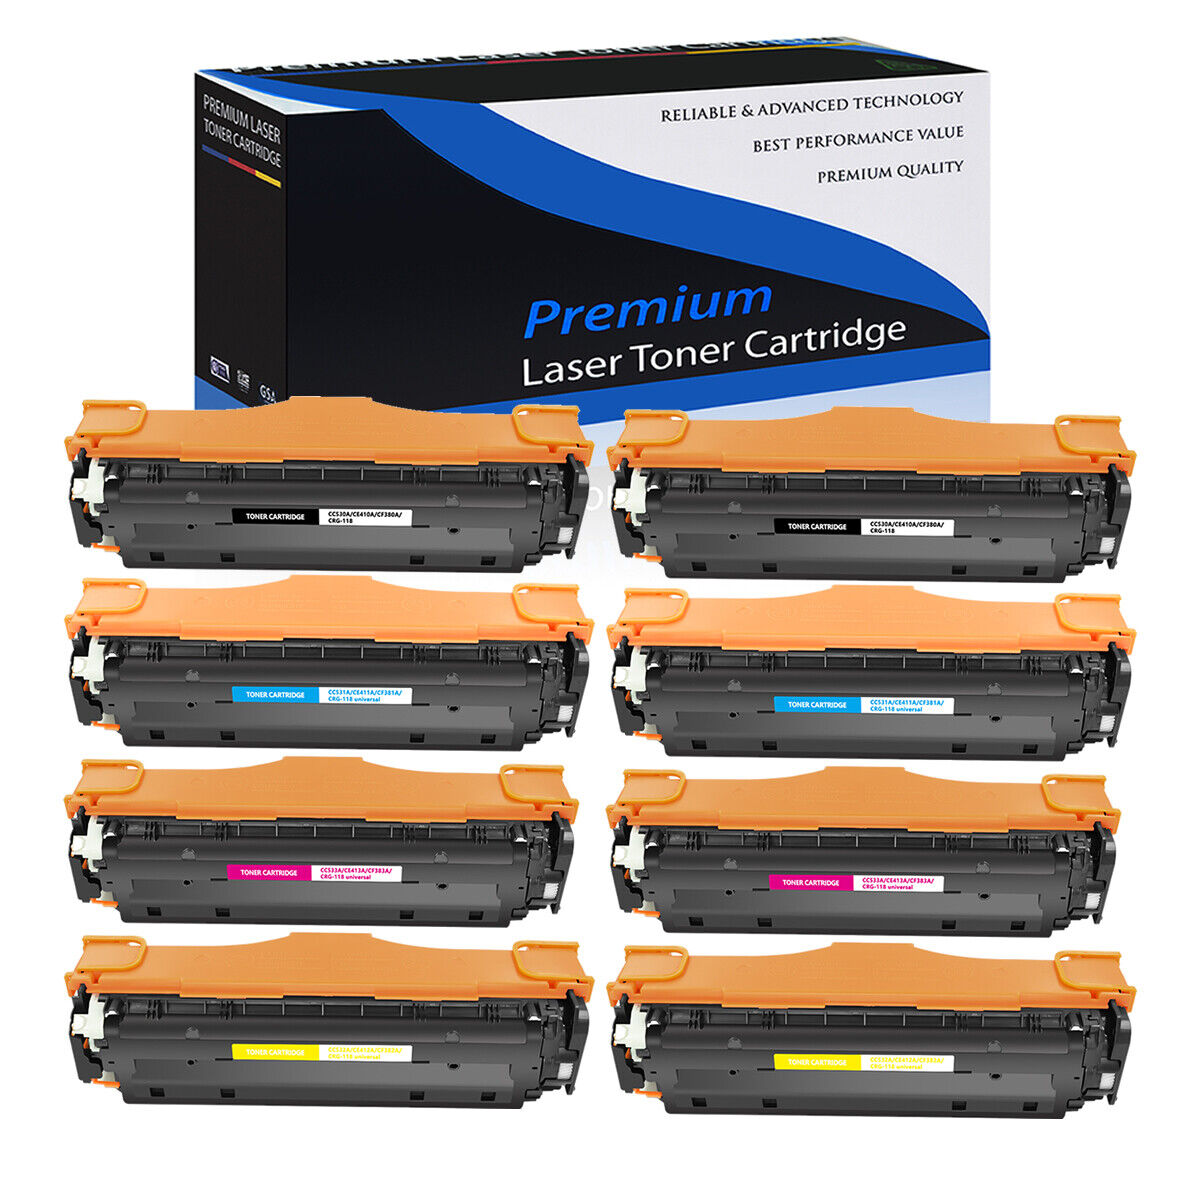 8PK CE410A CE411A CE412A CE413A Toner for HP LaserJet Pro 400 M451nw M451dn